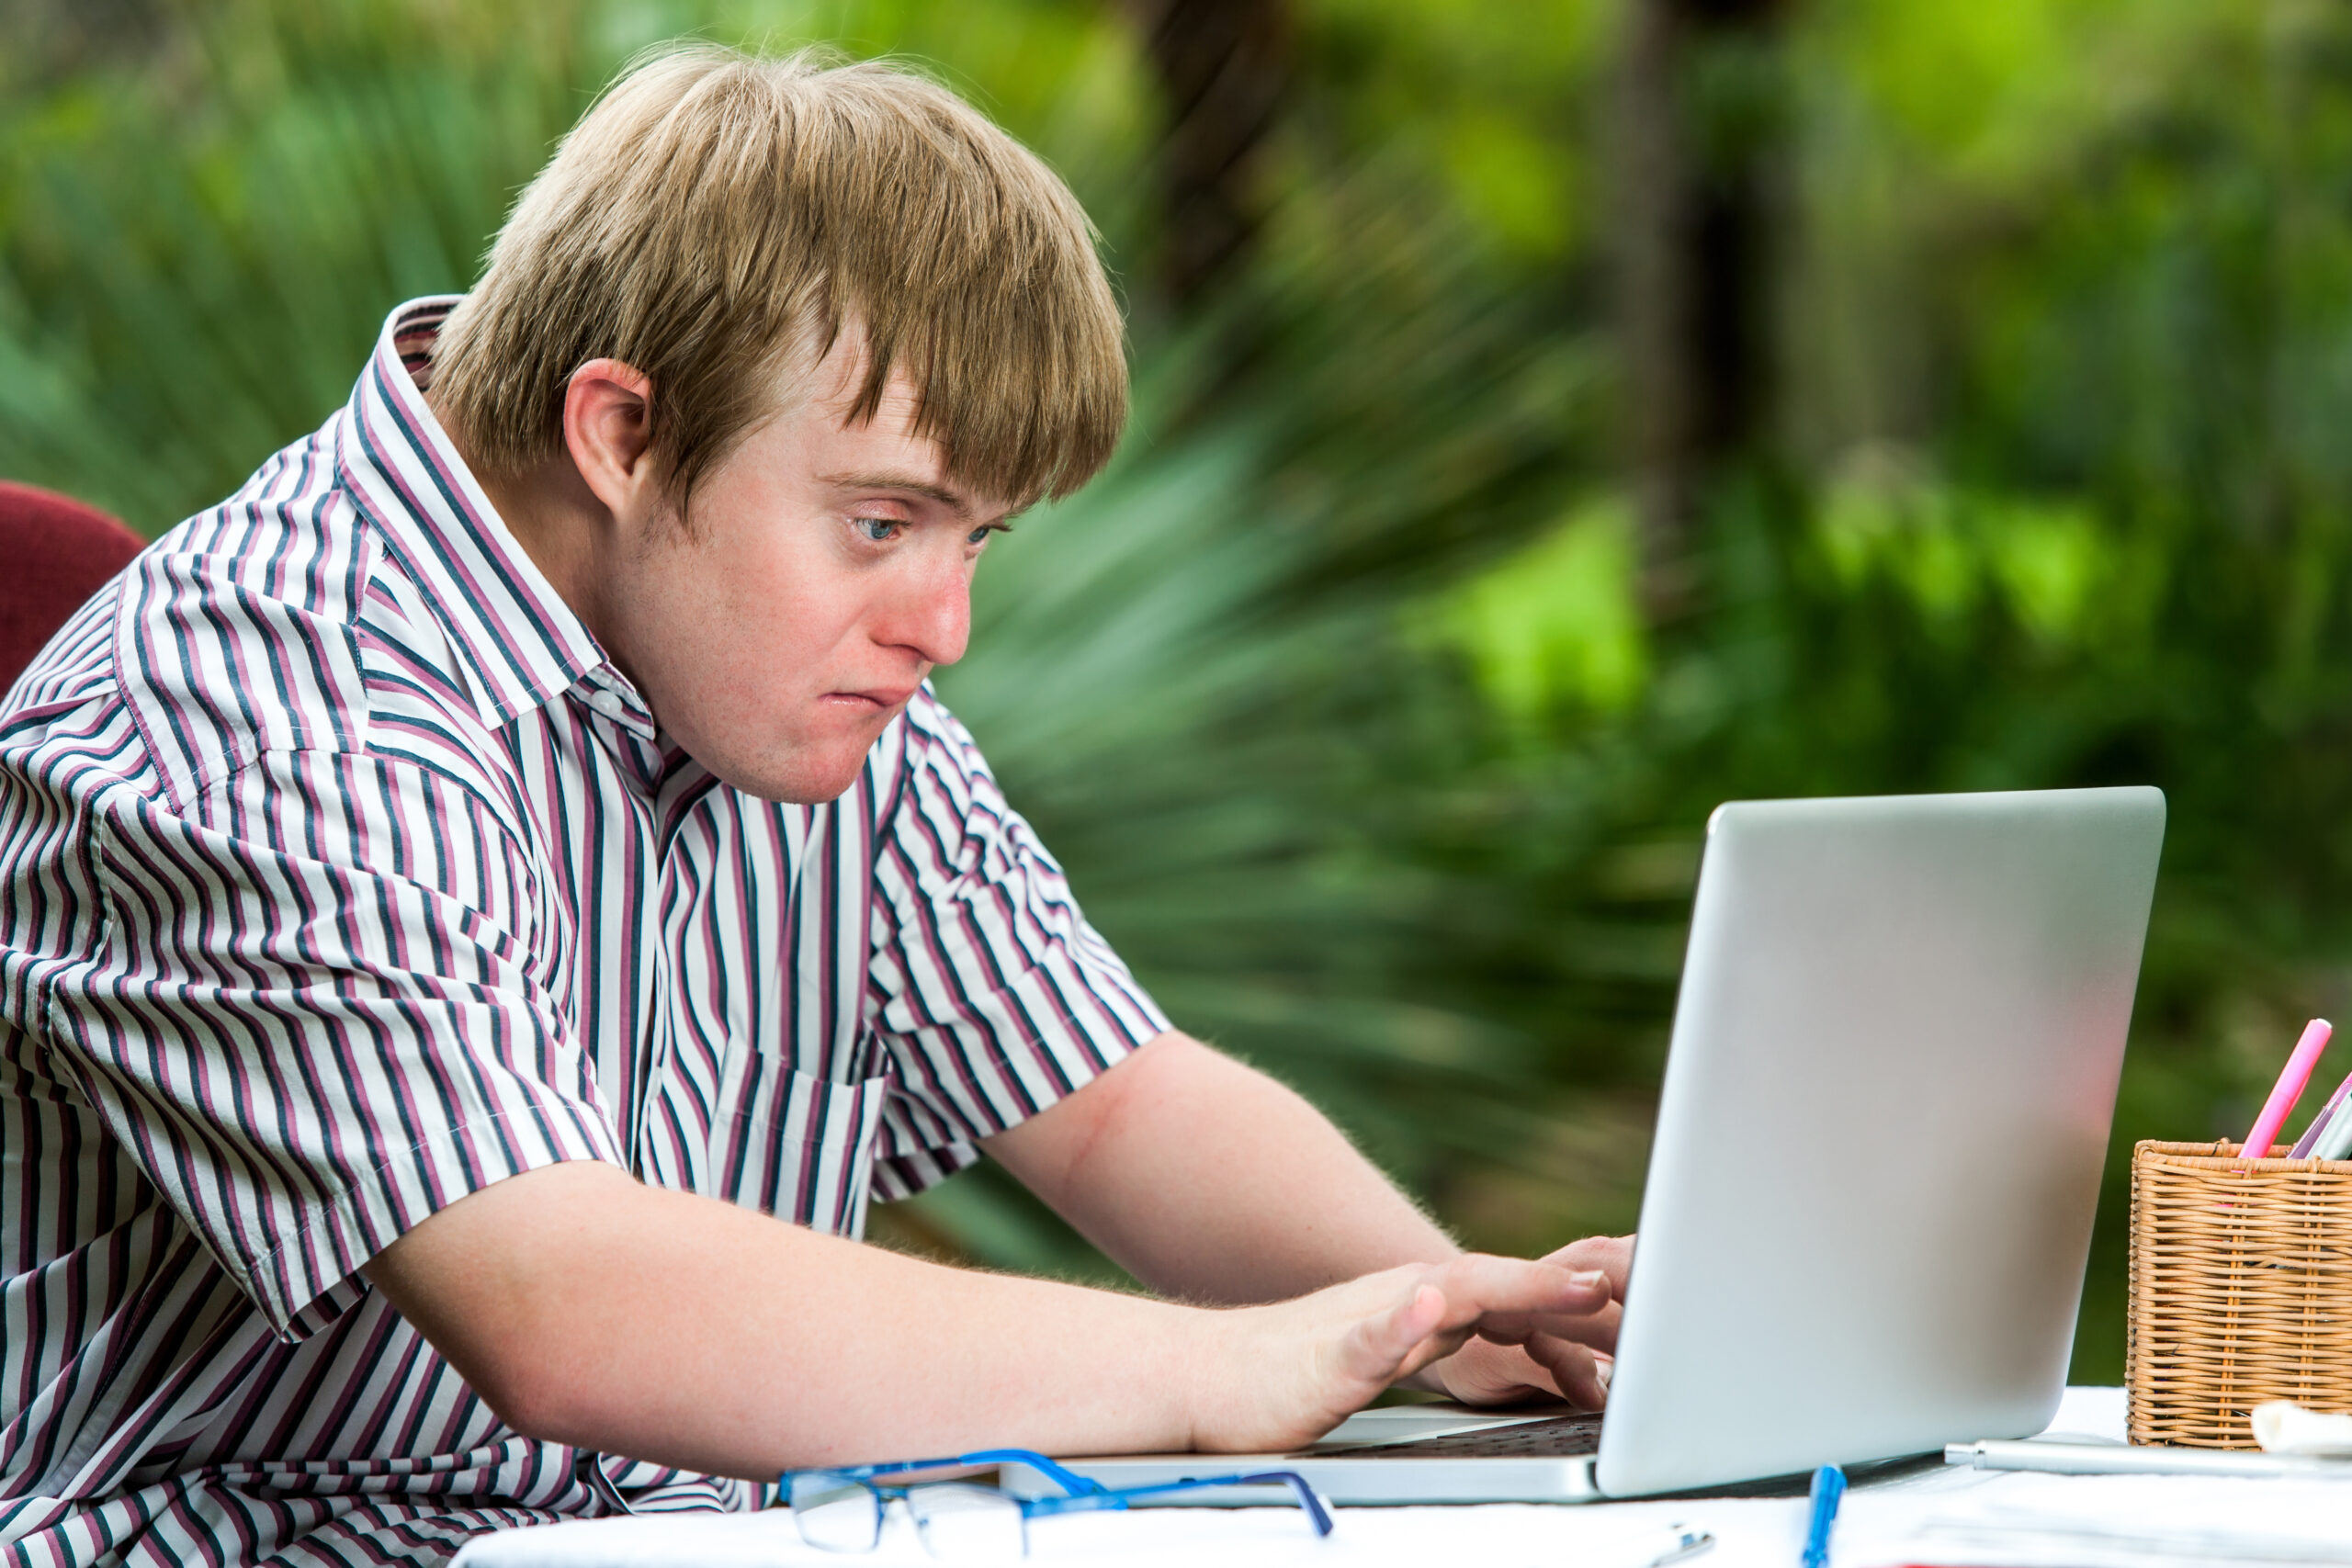 Portrait of concentrated young man with down syndrome working on laptop outdoors.